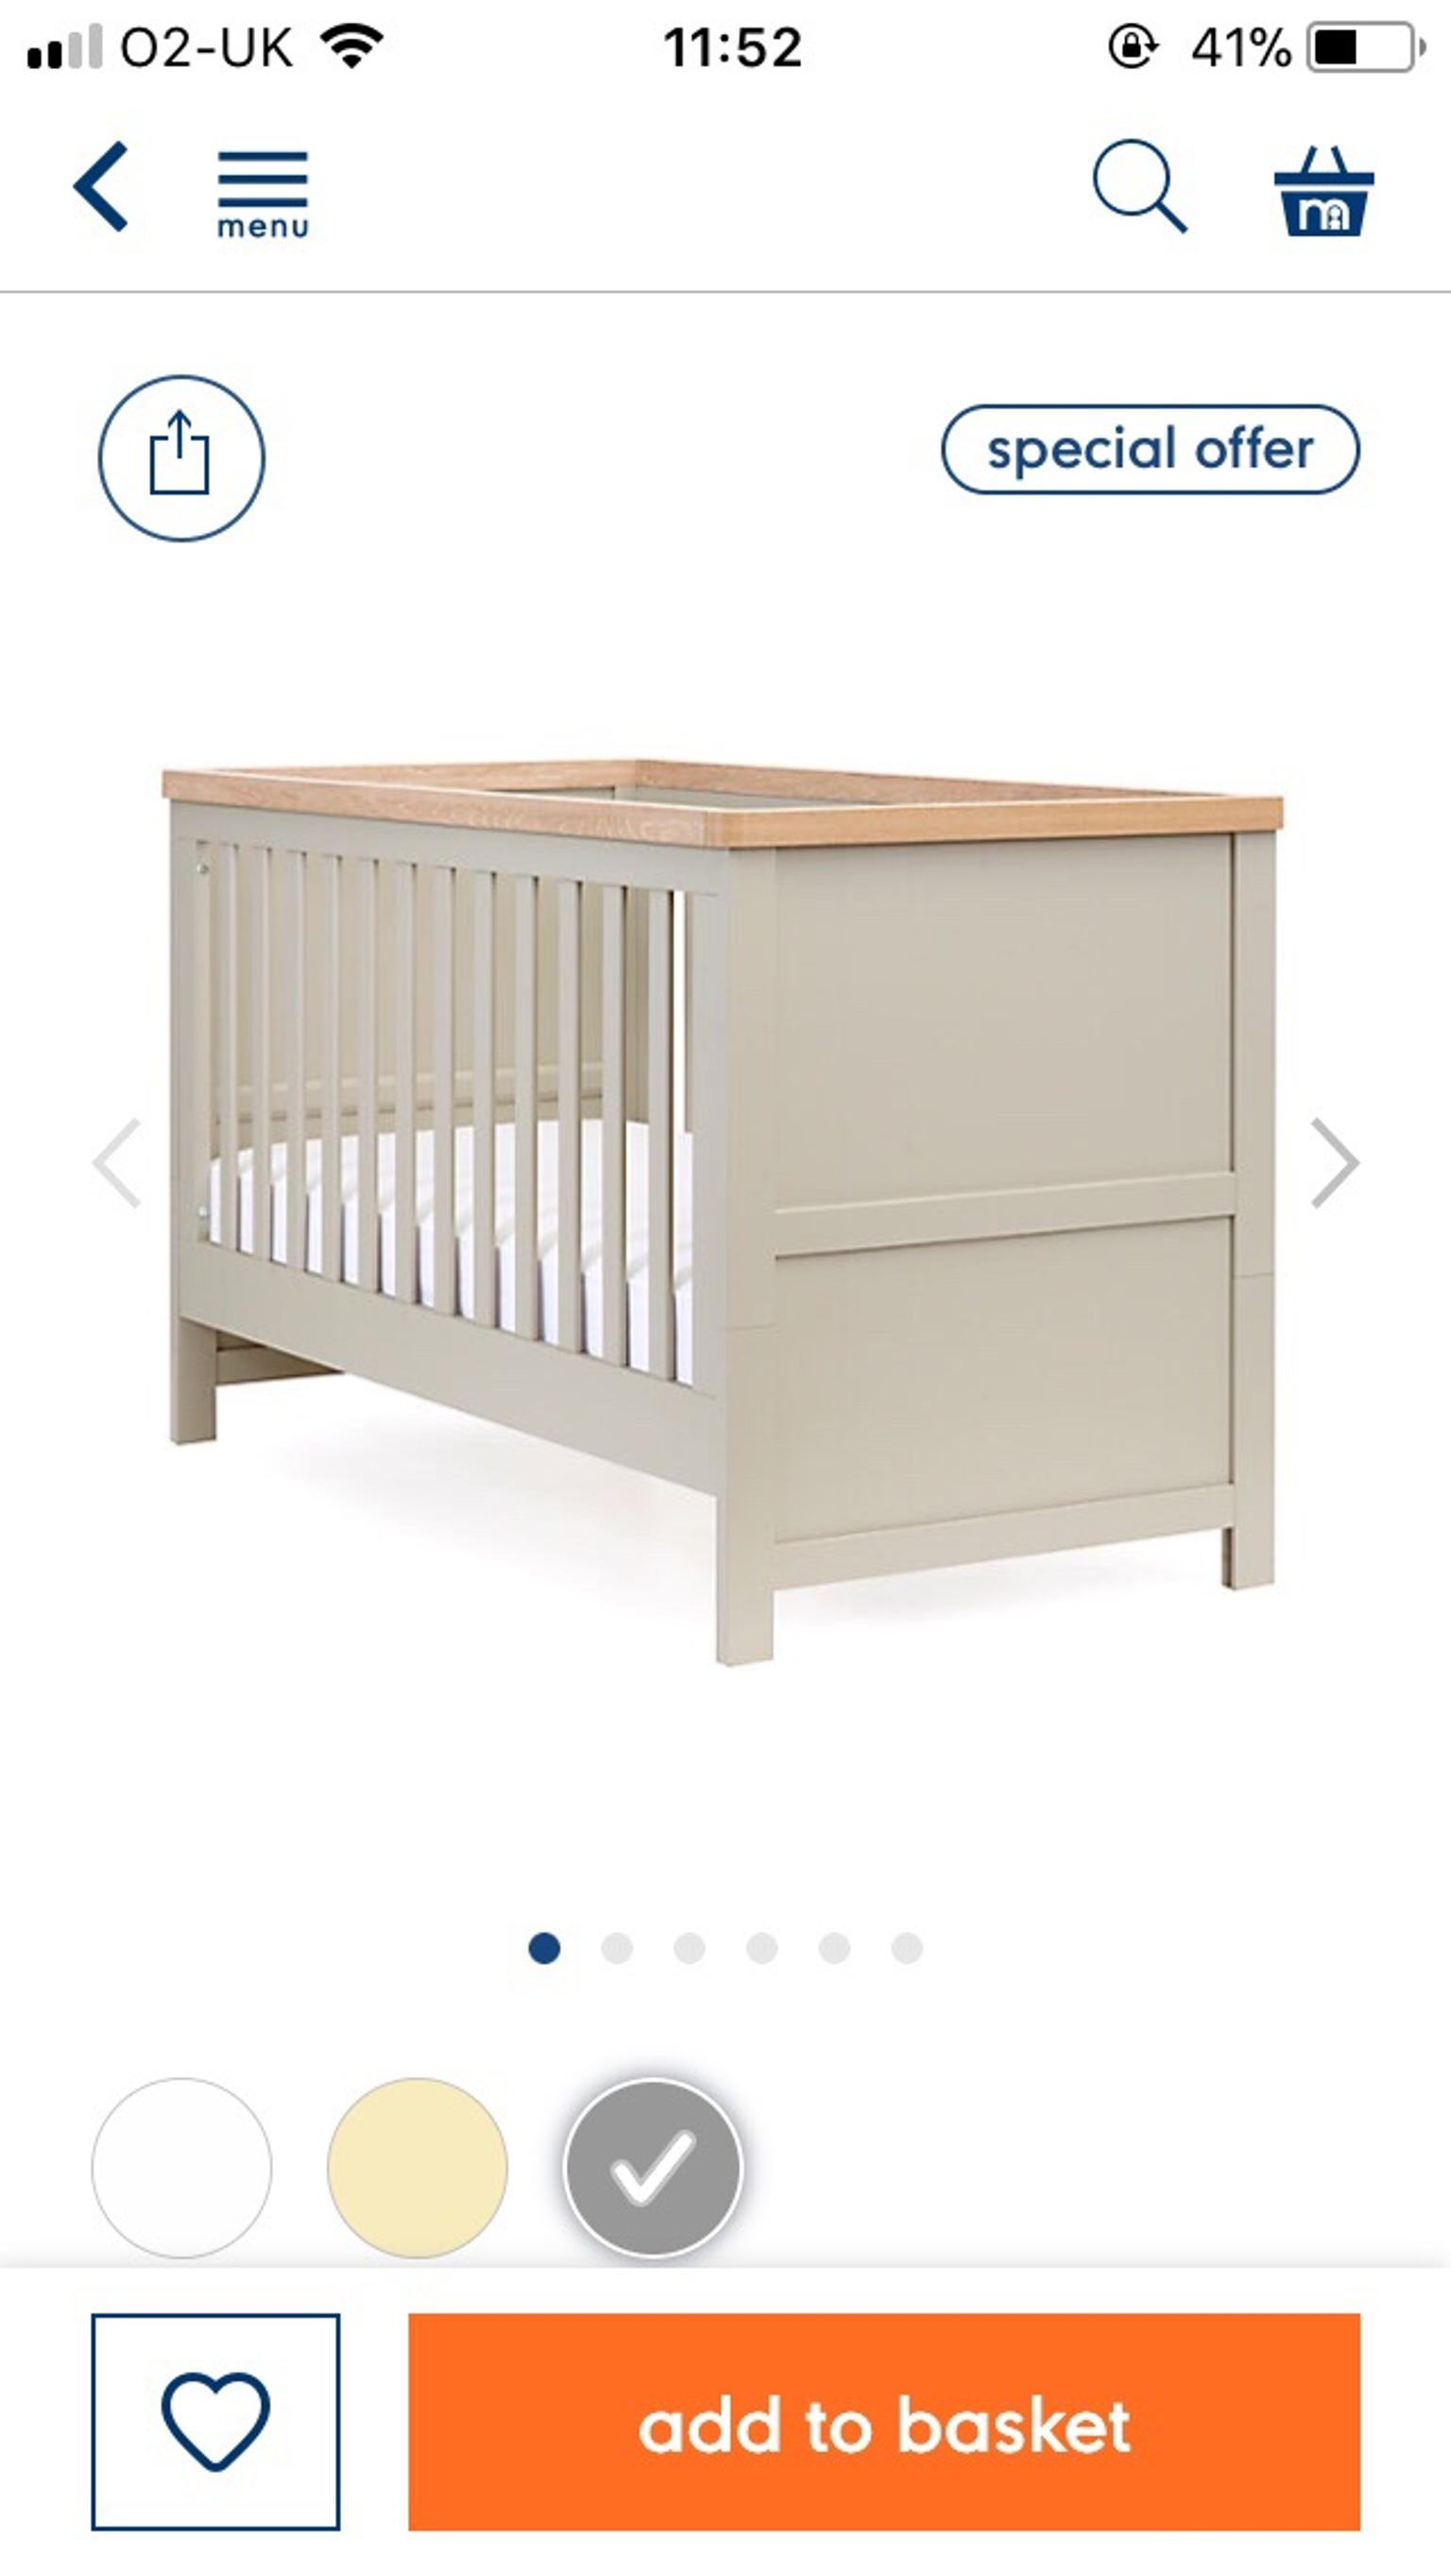 grey cot mothercare